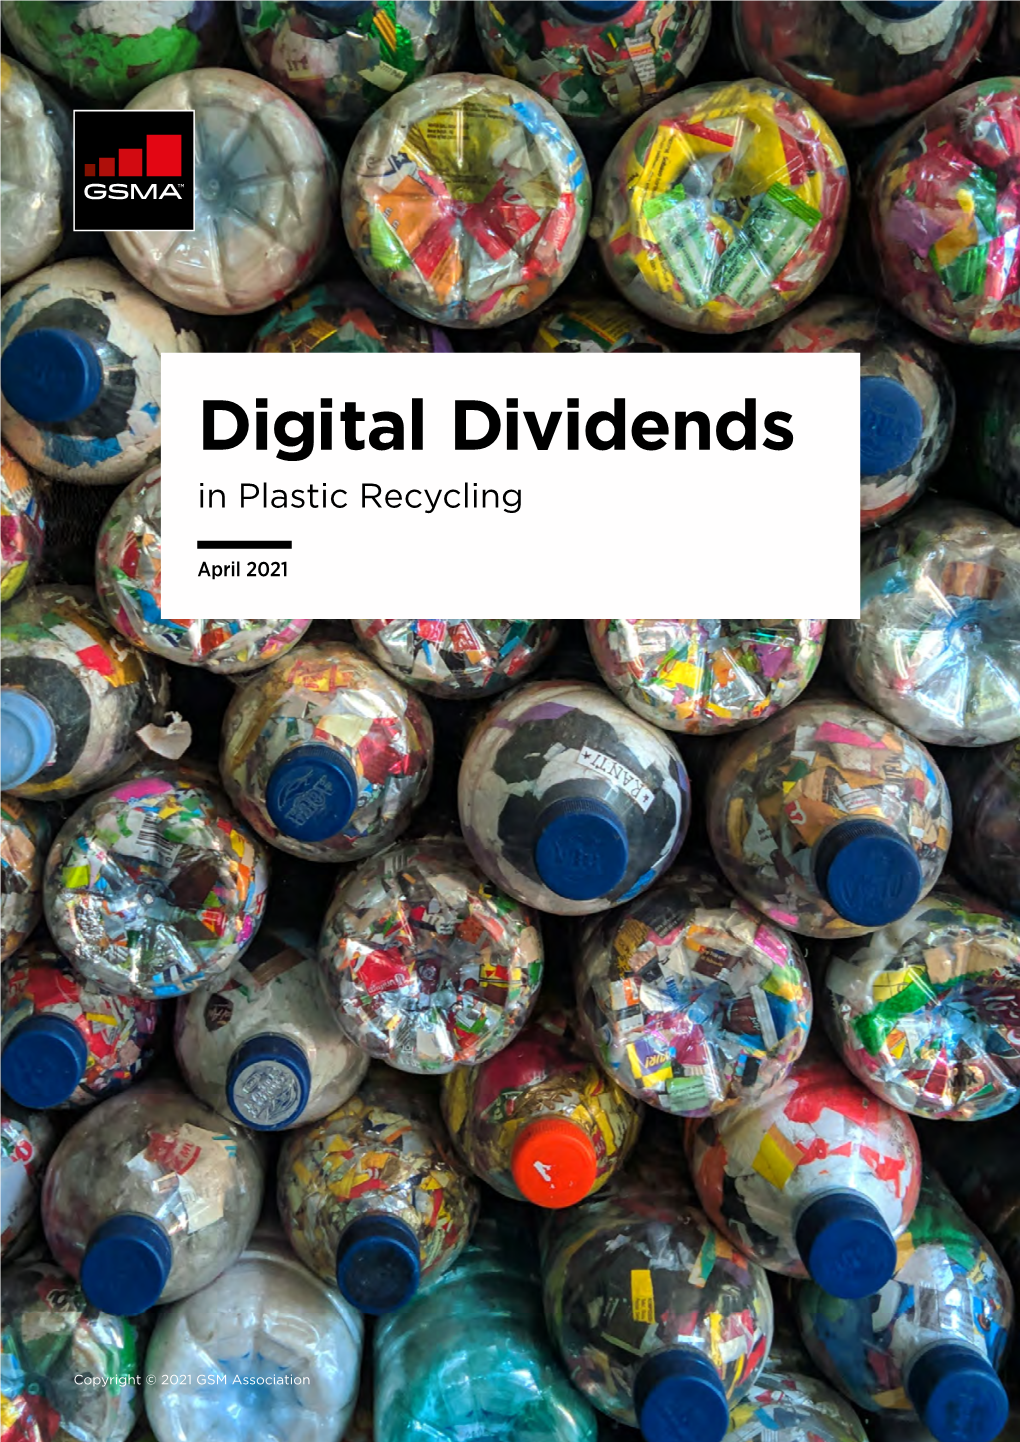 Digital Dividends in Plastic Recycling